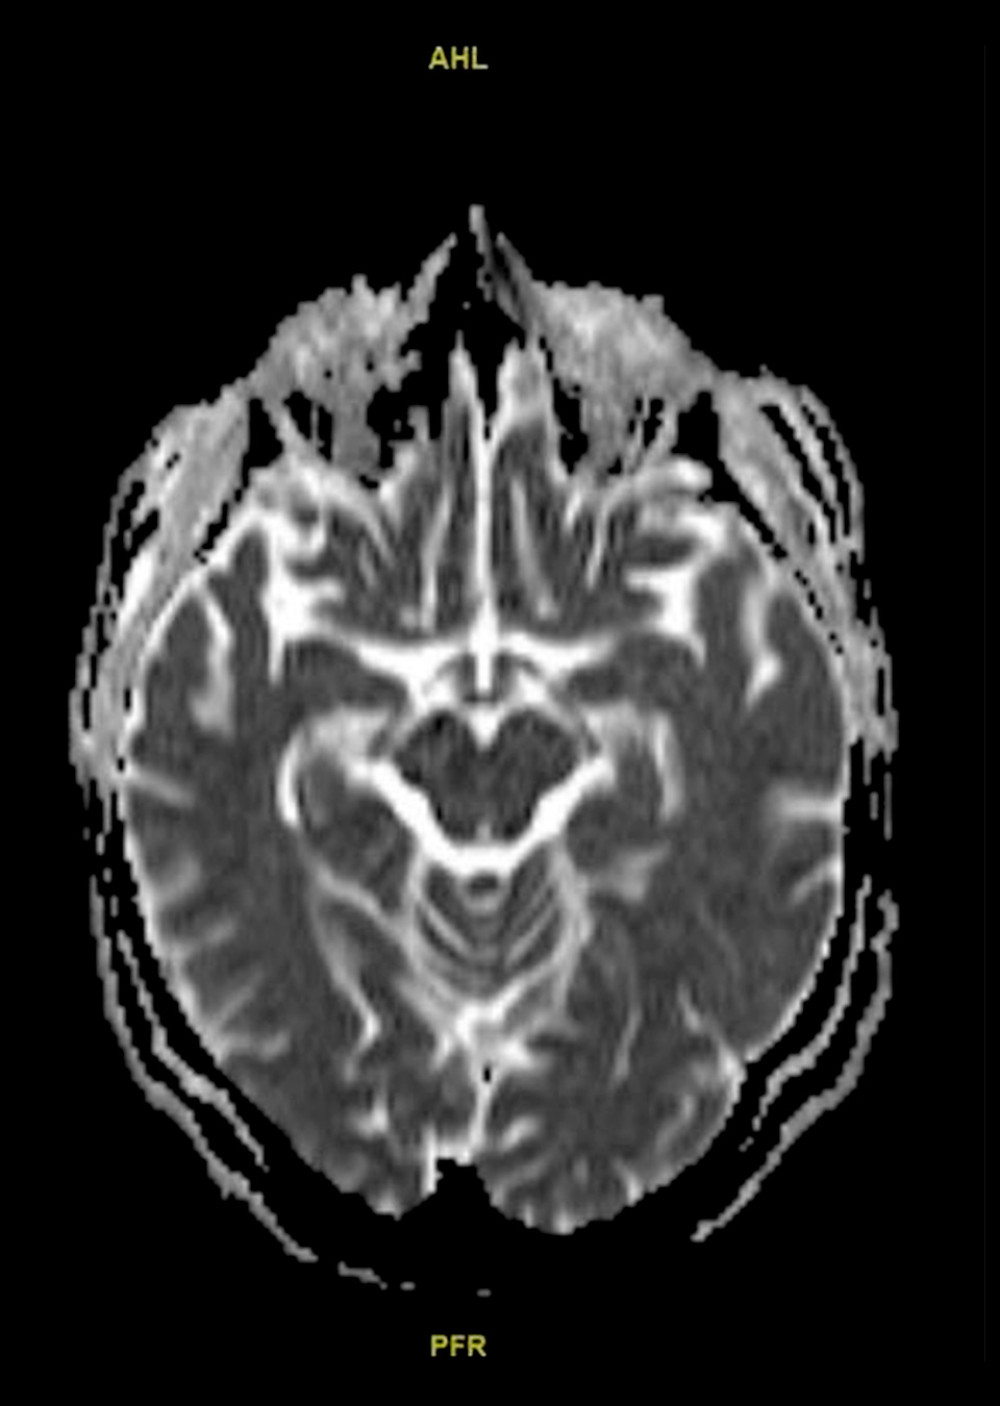 ADC MRI brain showing resolution of convexity SAH with no vasogenic edema or diffusion restriction.